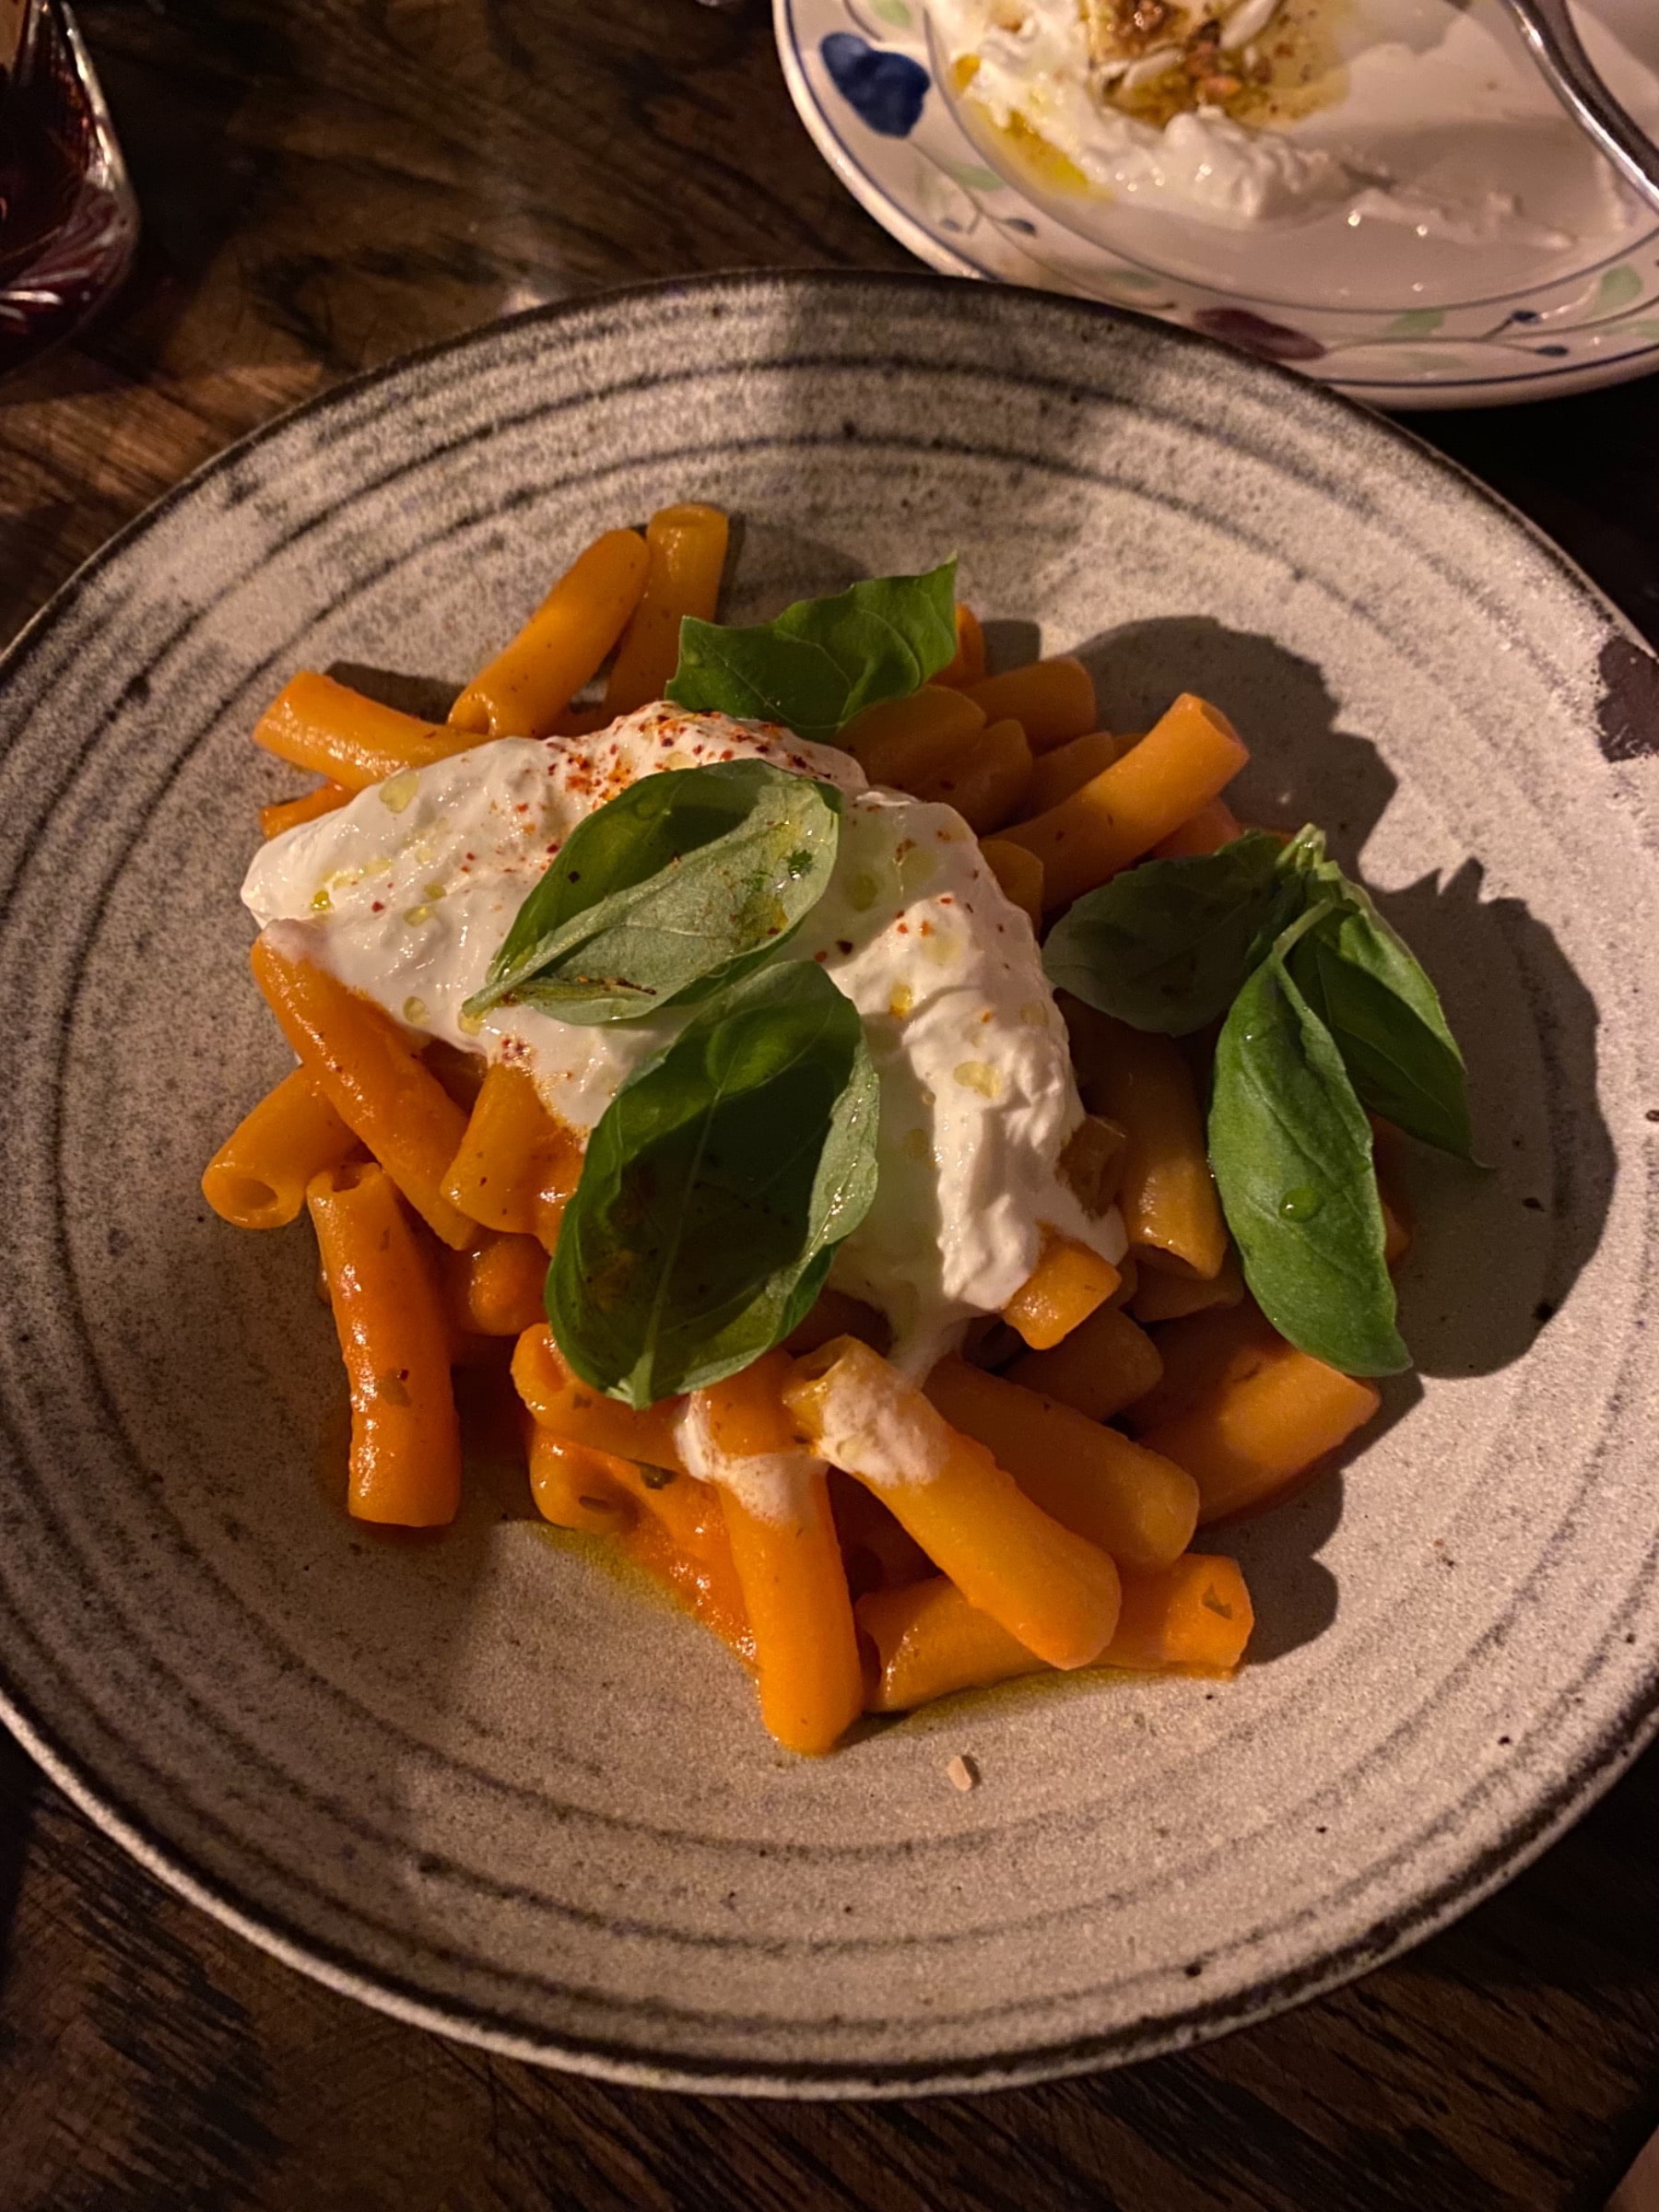 Penne med tomat och burrata  – Photo from Vineriet by Sofie L. (22/10/2021)